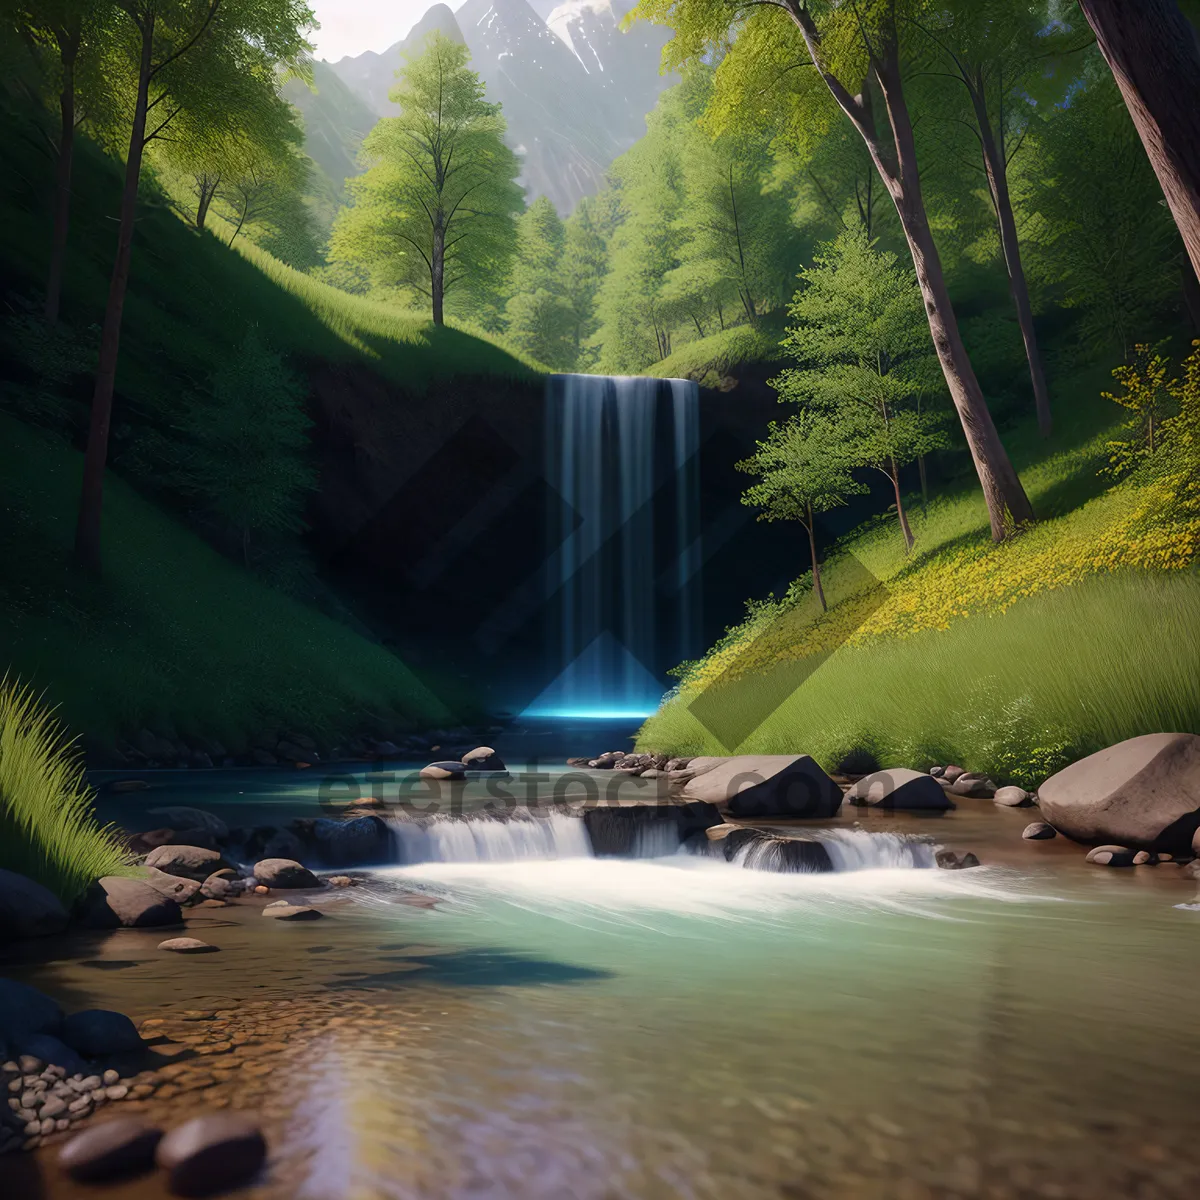 Picture of Serene River Cascade Through Lush Forest